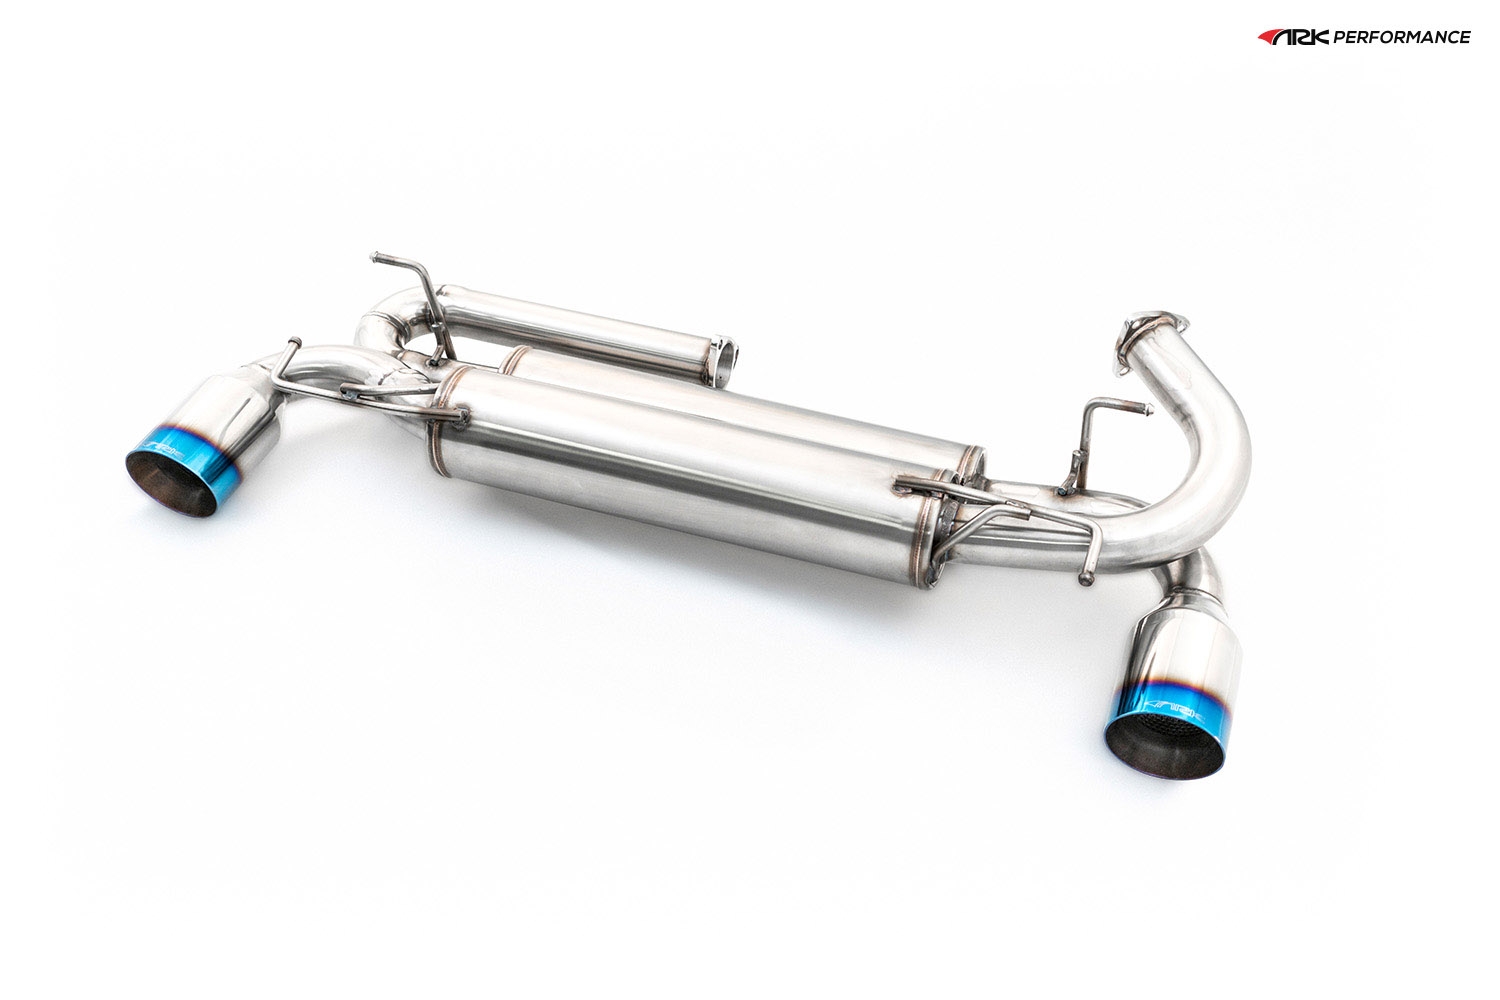 Ark Performance Stainless Steel DT-S Cat-Back Exhaust System 2.5in Pipe w/ 4.5 Burnt Single Tip, Dual Exit - Acura NSX 91-96 3.0L V6 NA1